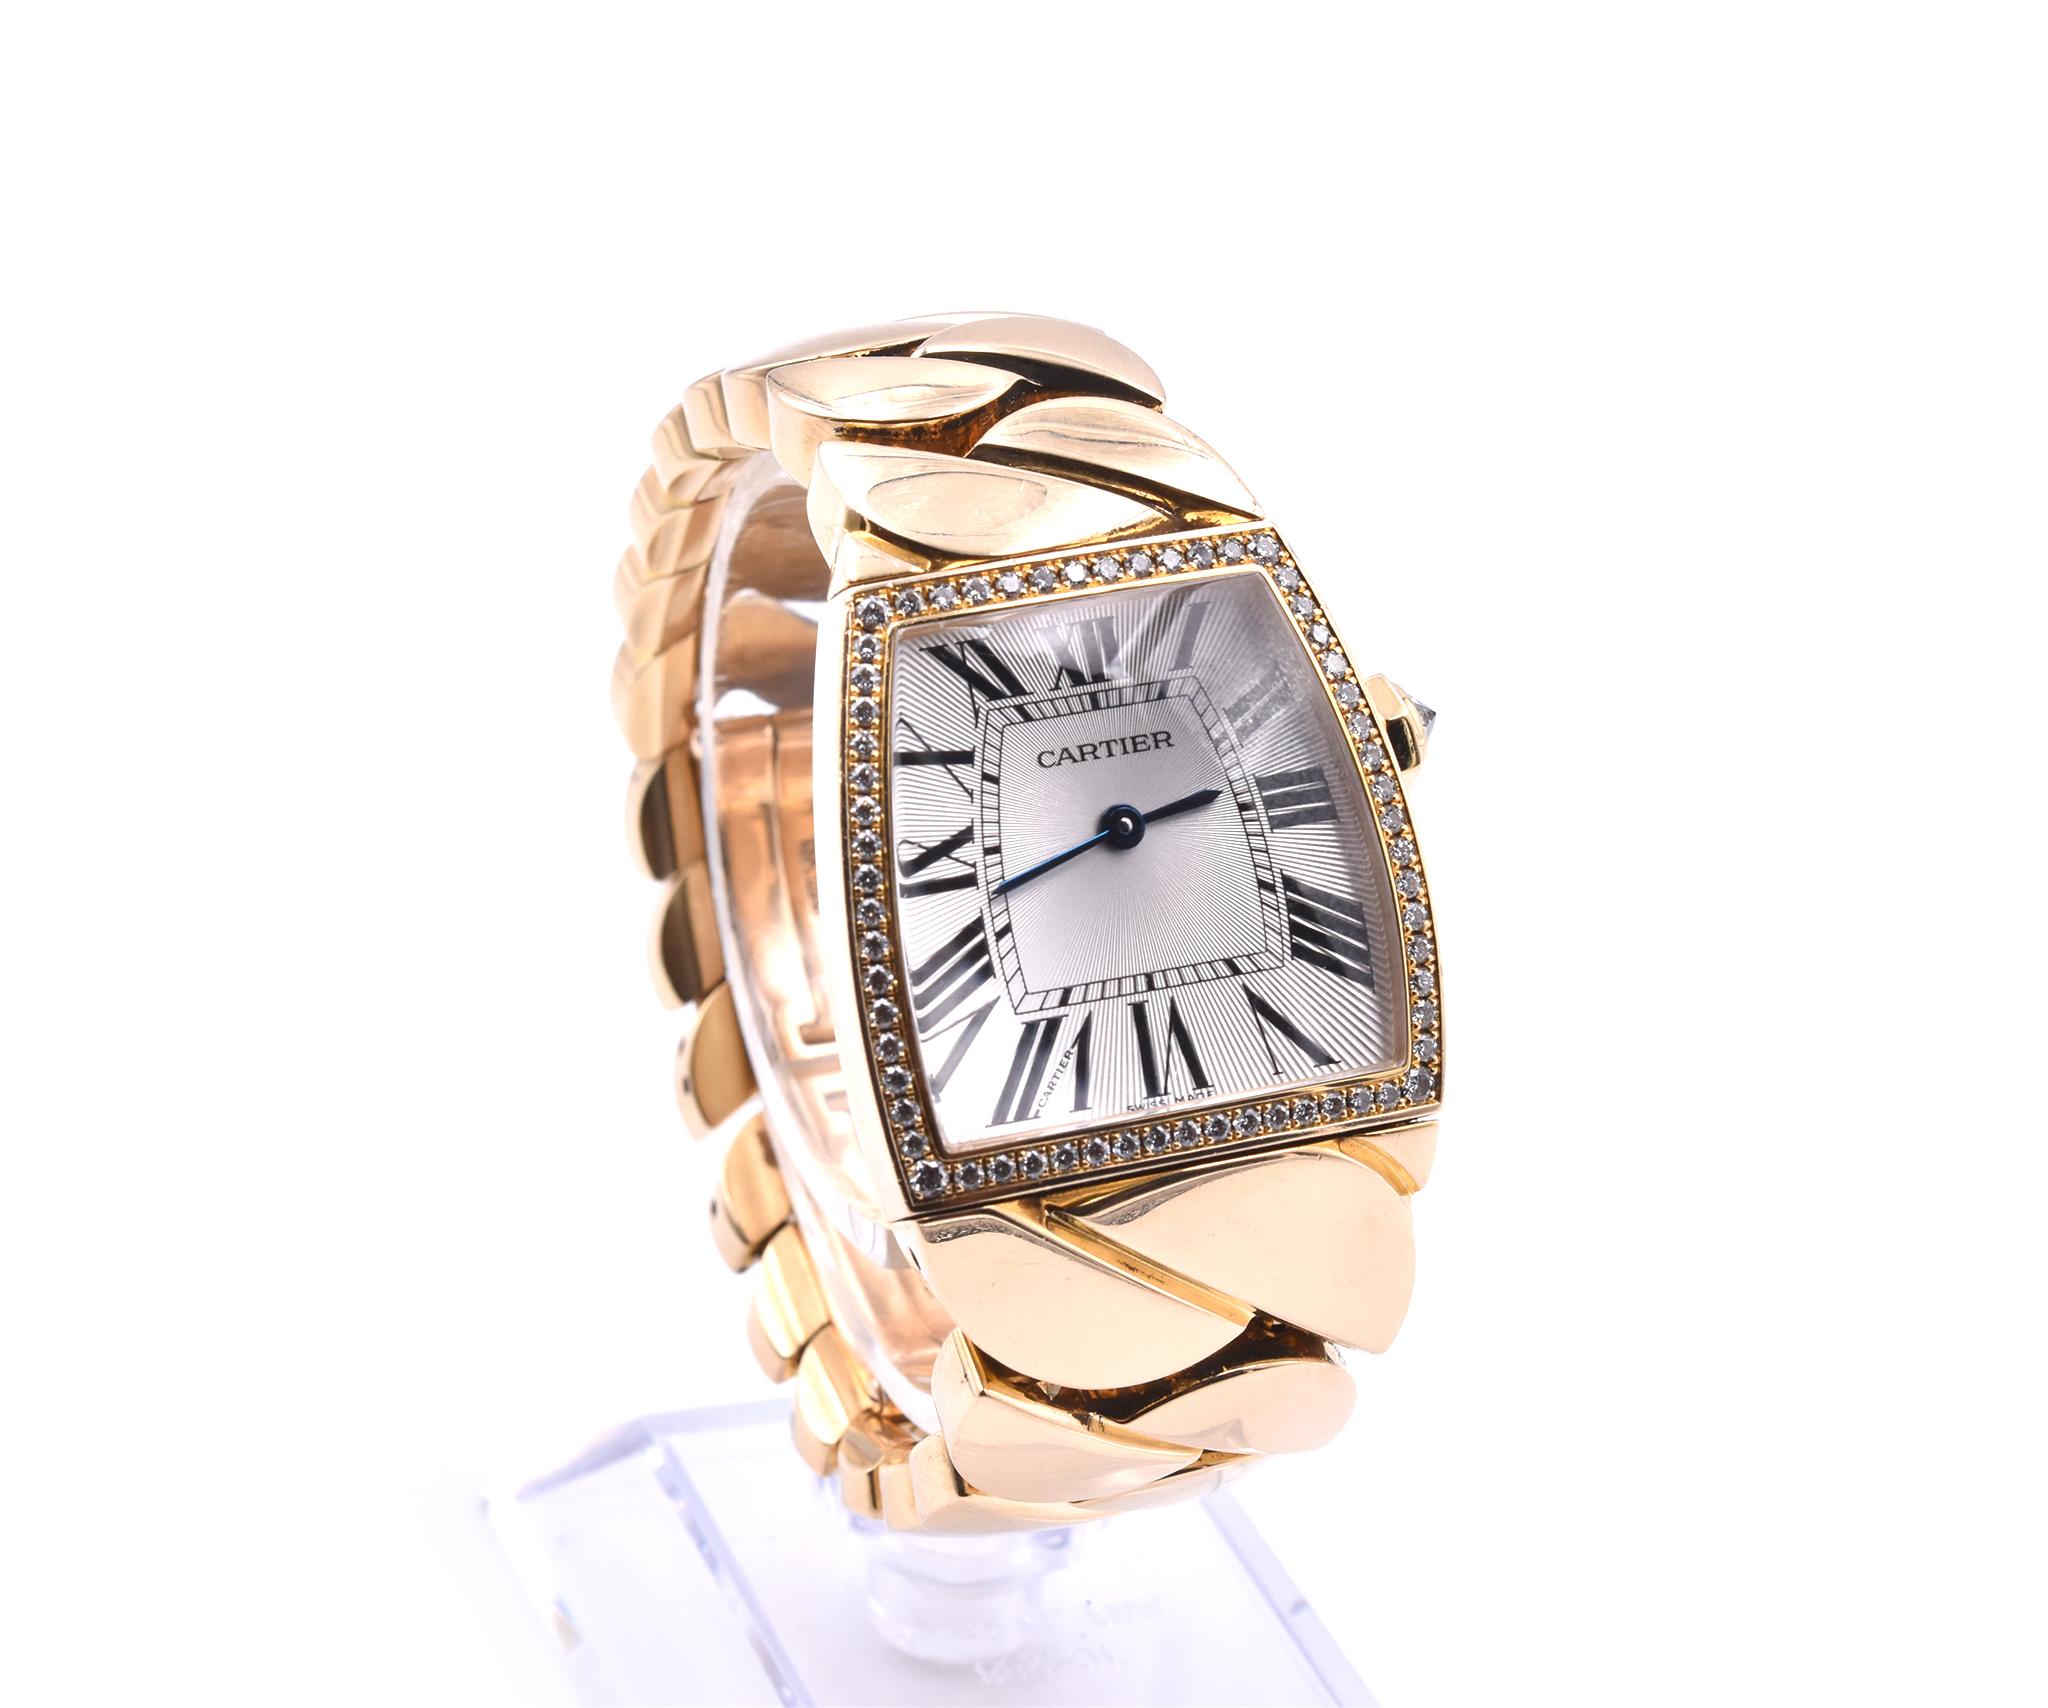 Movement: automatic
Function: hours, minutes
Case: 28mm 18k yellow gold case, diamond bezel, push/pull crown,  
Dial: silver dial with black Roman numerals, blue steel hands
Band: 18k yellow gold band, double fold down clasp, will fit up to an 8-